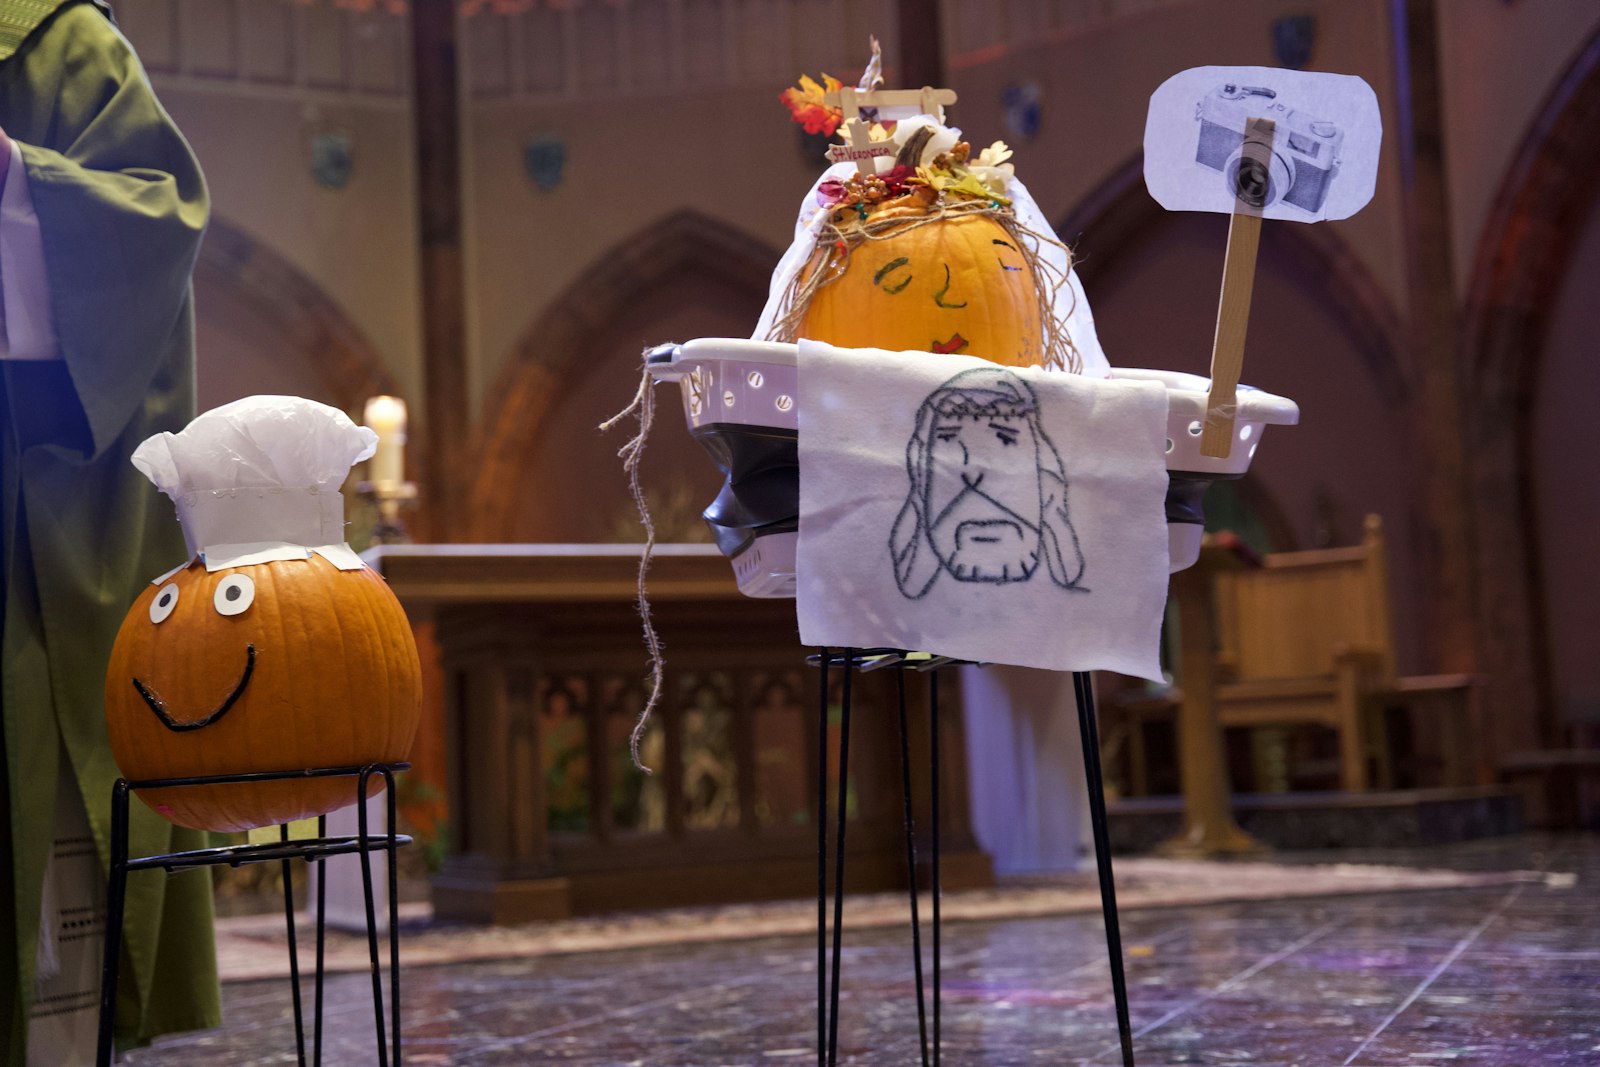 The fifth-graders' pumpkin of St. Veronica not only included her veil with the face of Jesus on it, but also a laundry basket and camera, representing that she is the patron of laundry workers and photography. At left is St. Martha, depicted as a chef because she's the patron saint of cooks.